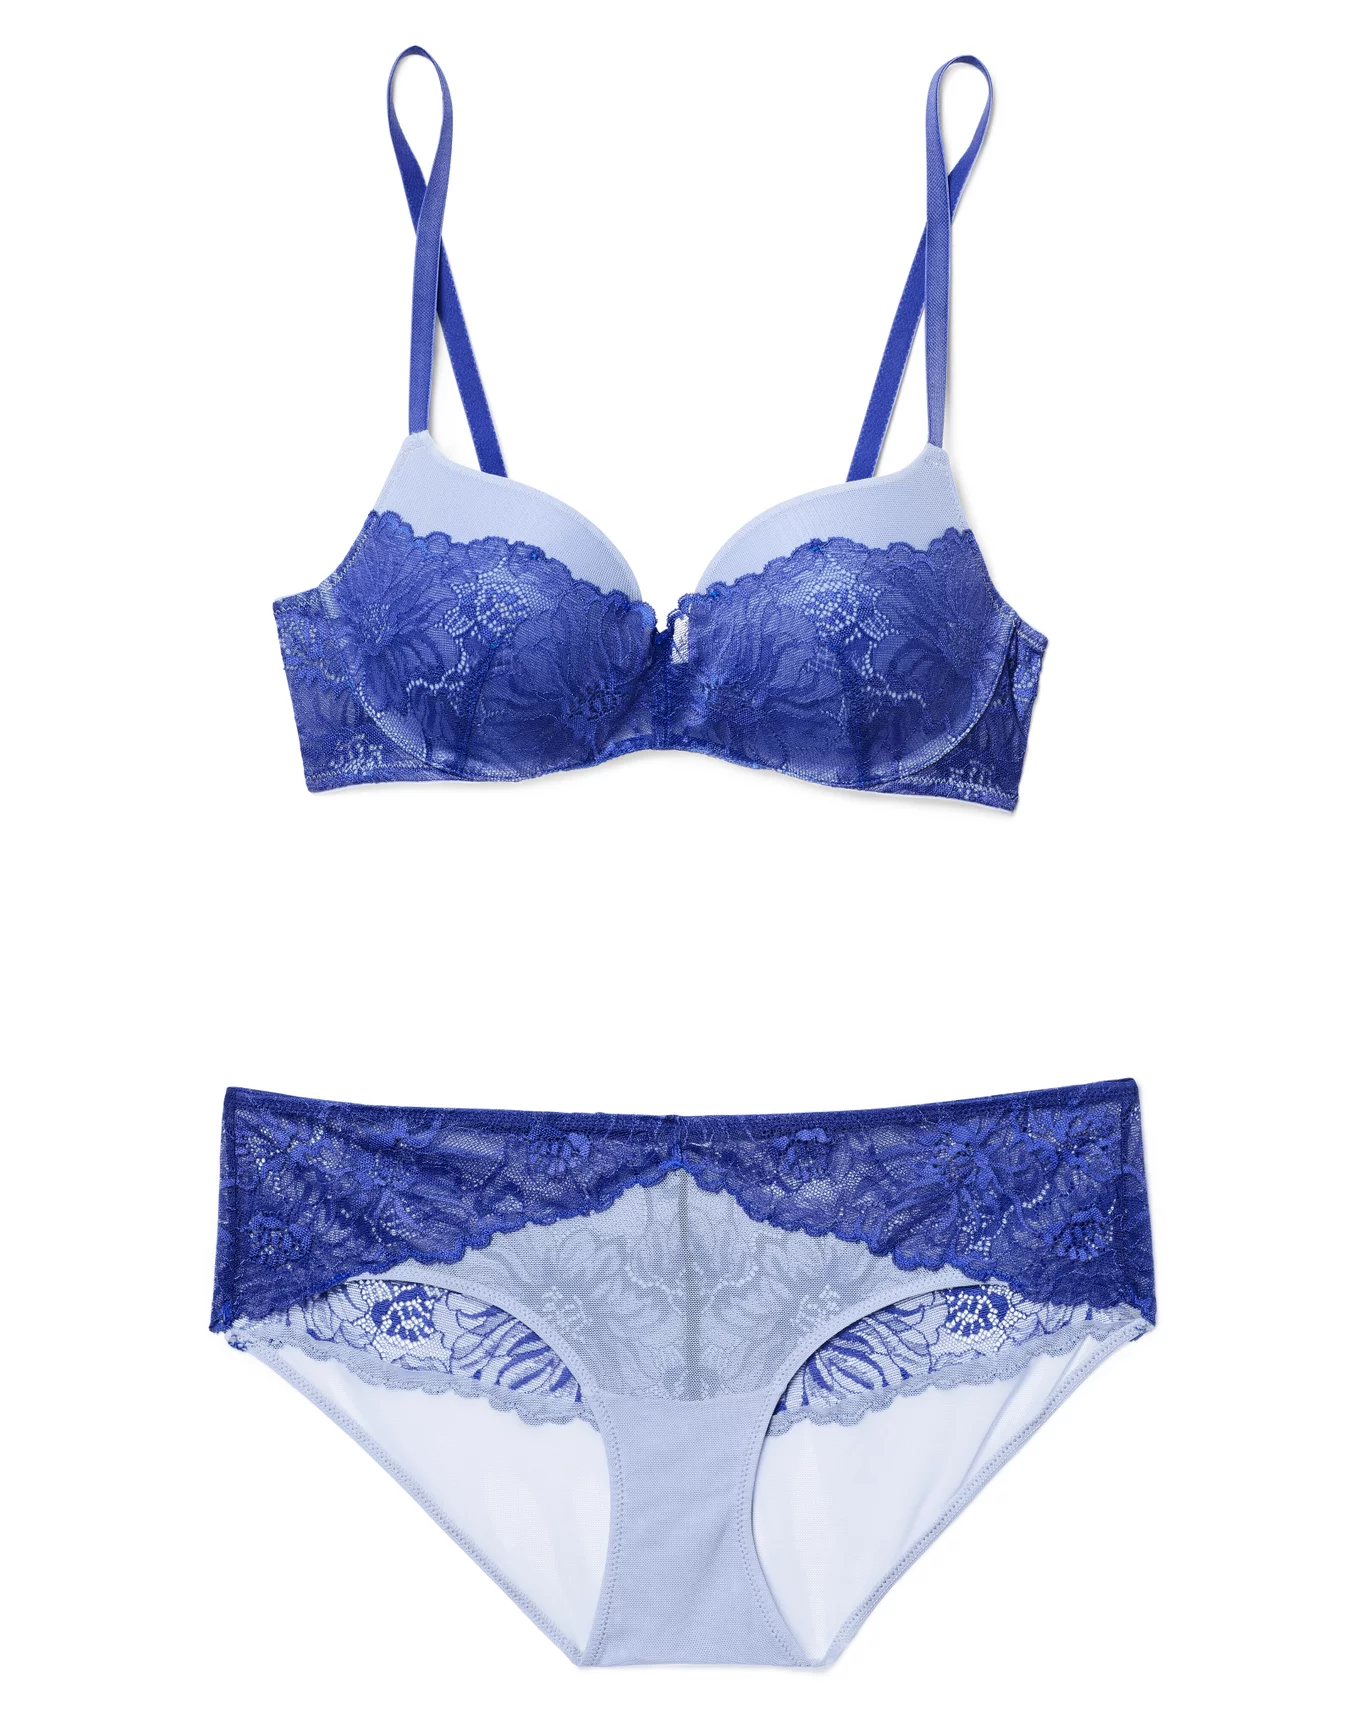 What is Pushup Push up Women Lingeries-Sexy XXL Bra and Panty Sets Blue  Plus Size Lingerie